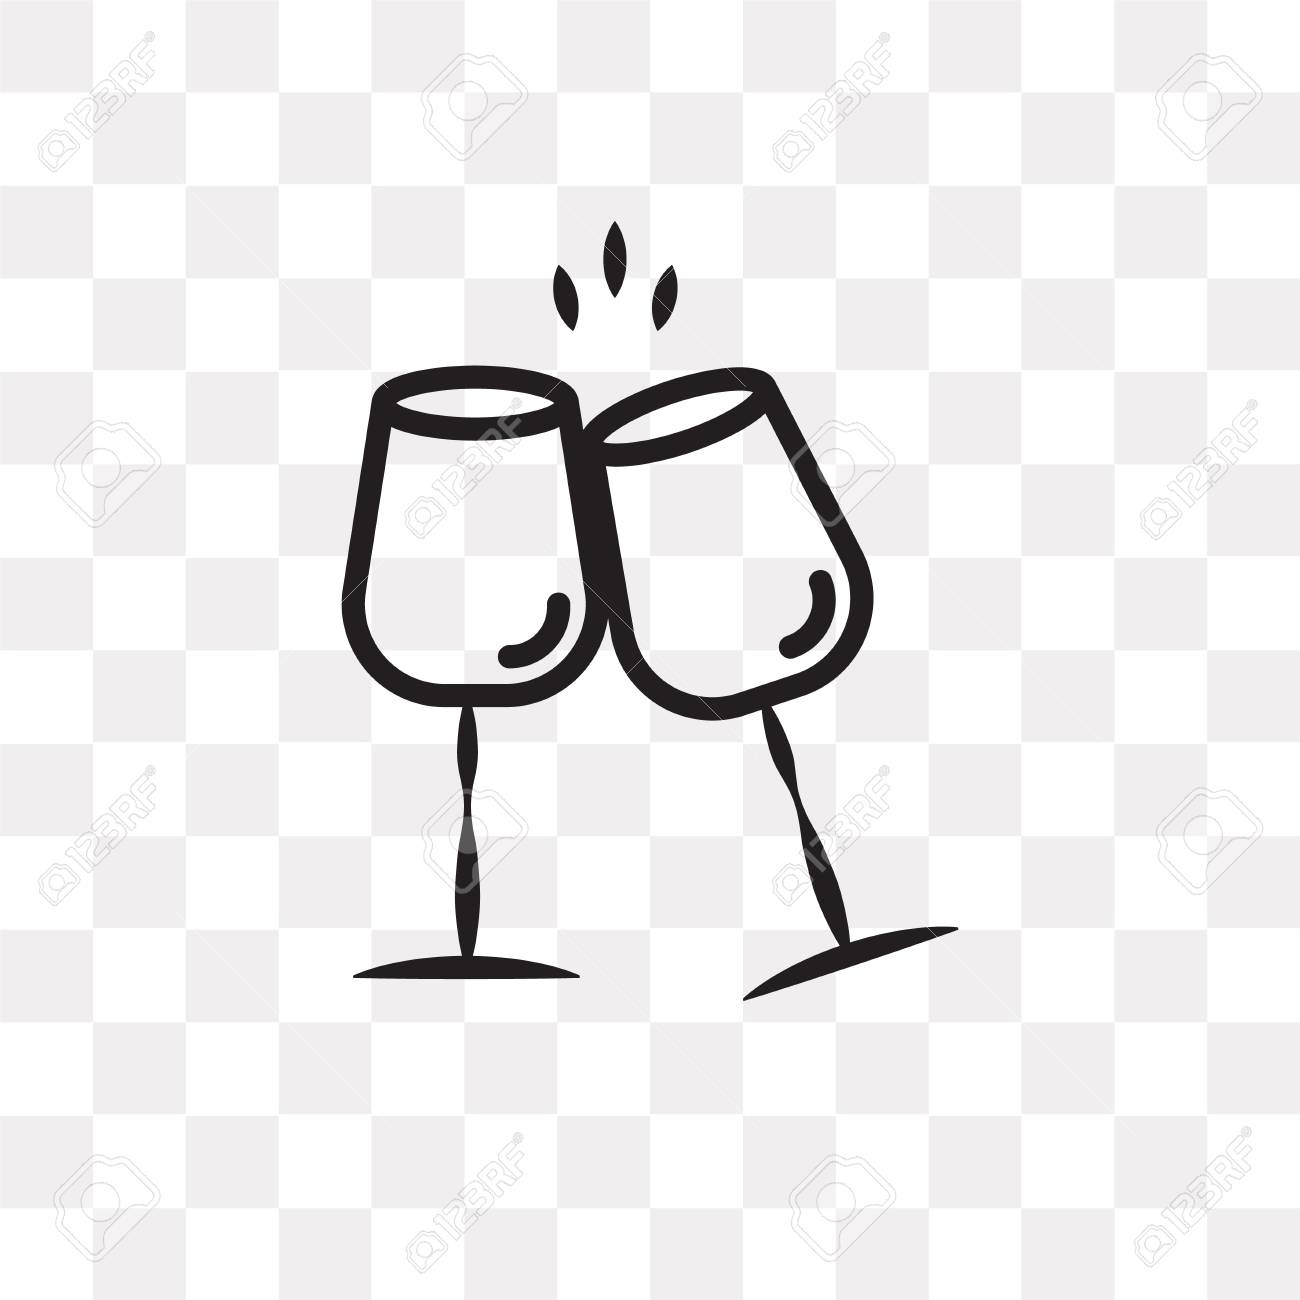 Wine Glass Vector Icon Isolated On Transparent Background